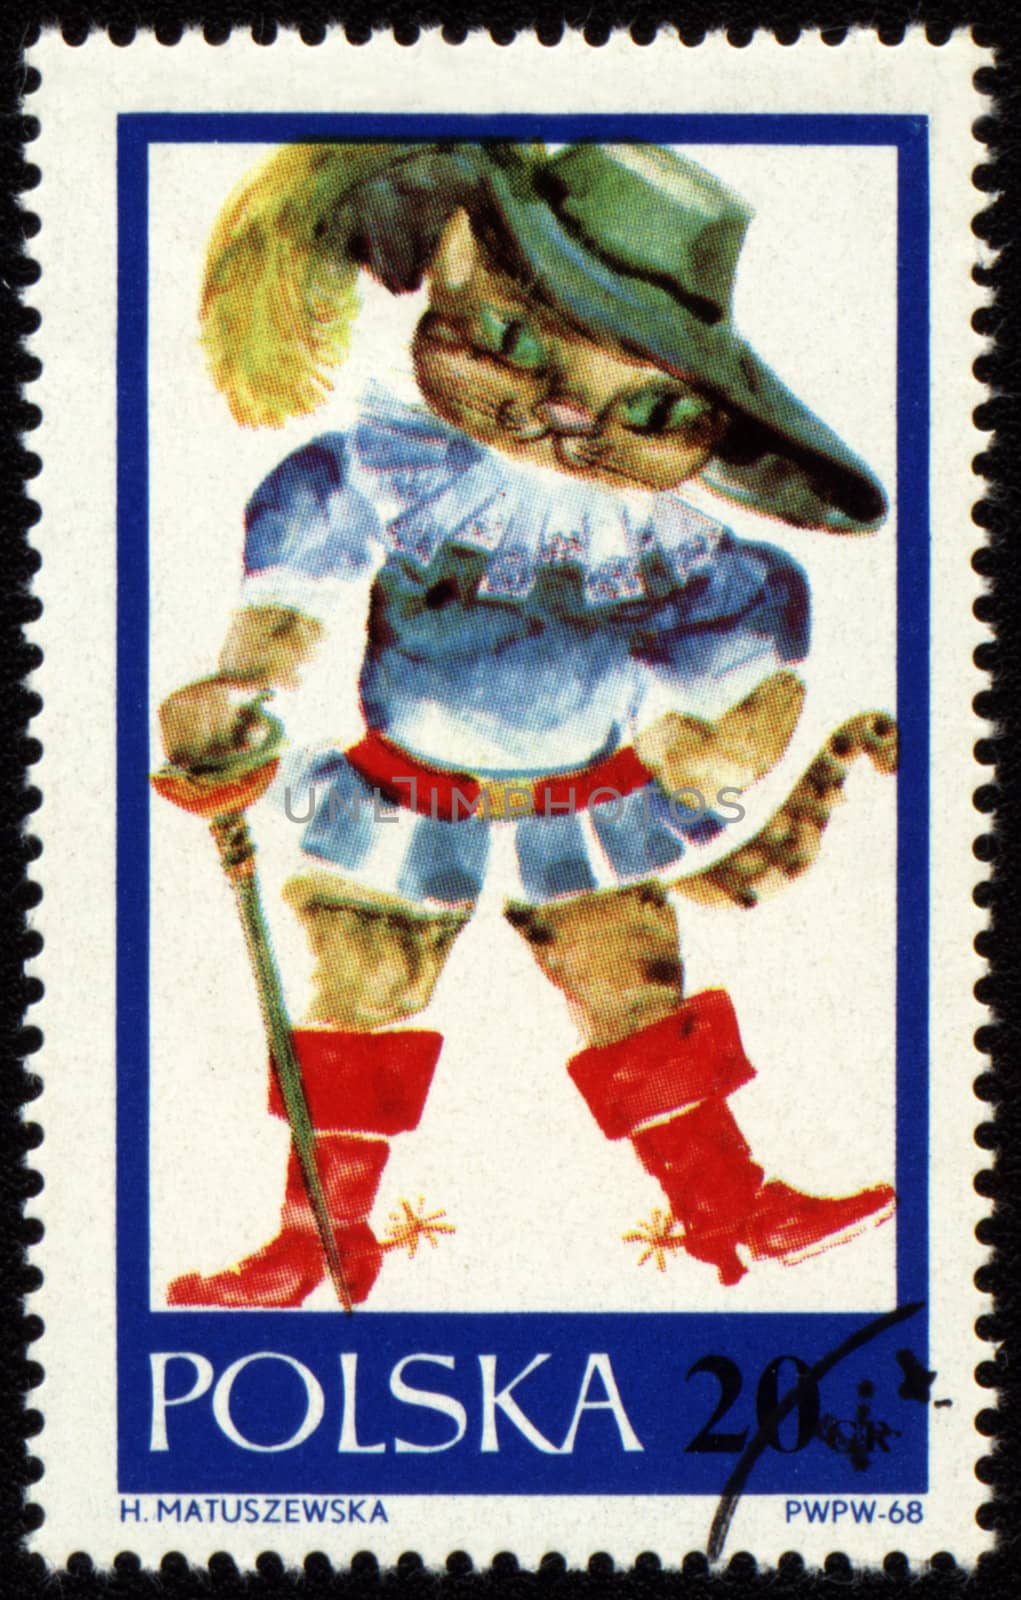 POLAND - CIRCA 1968: a stamp printed in Poland, shows drawing from tale 'Puss in Boots', circa 1968